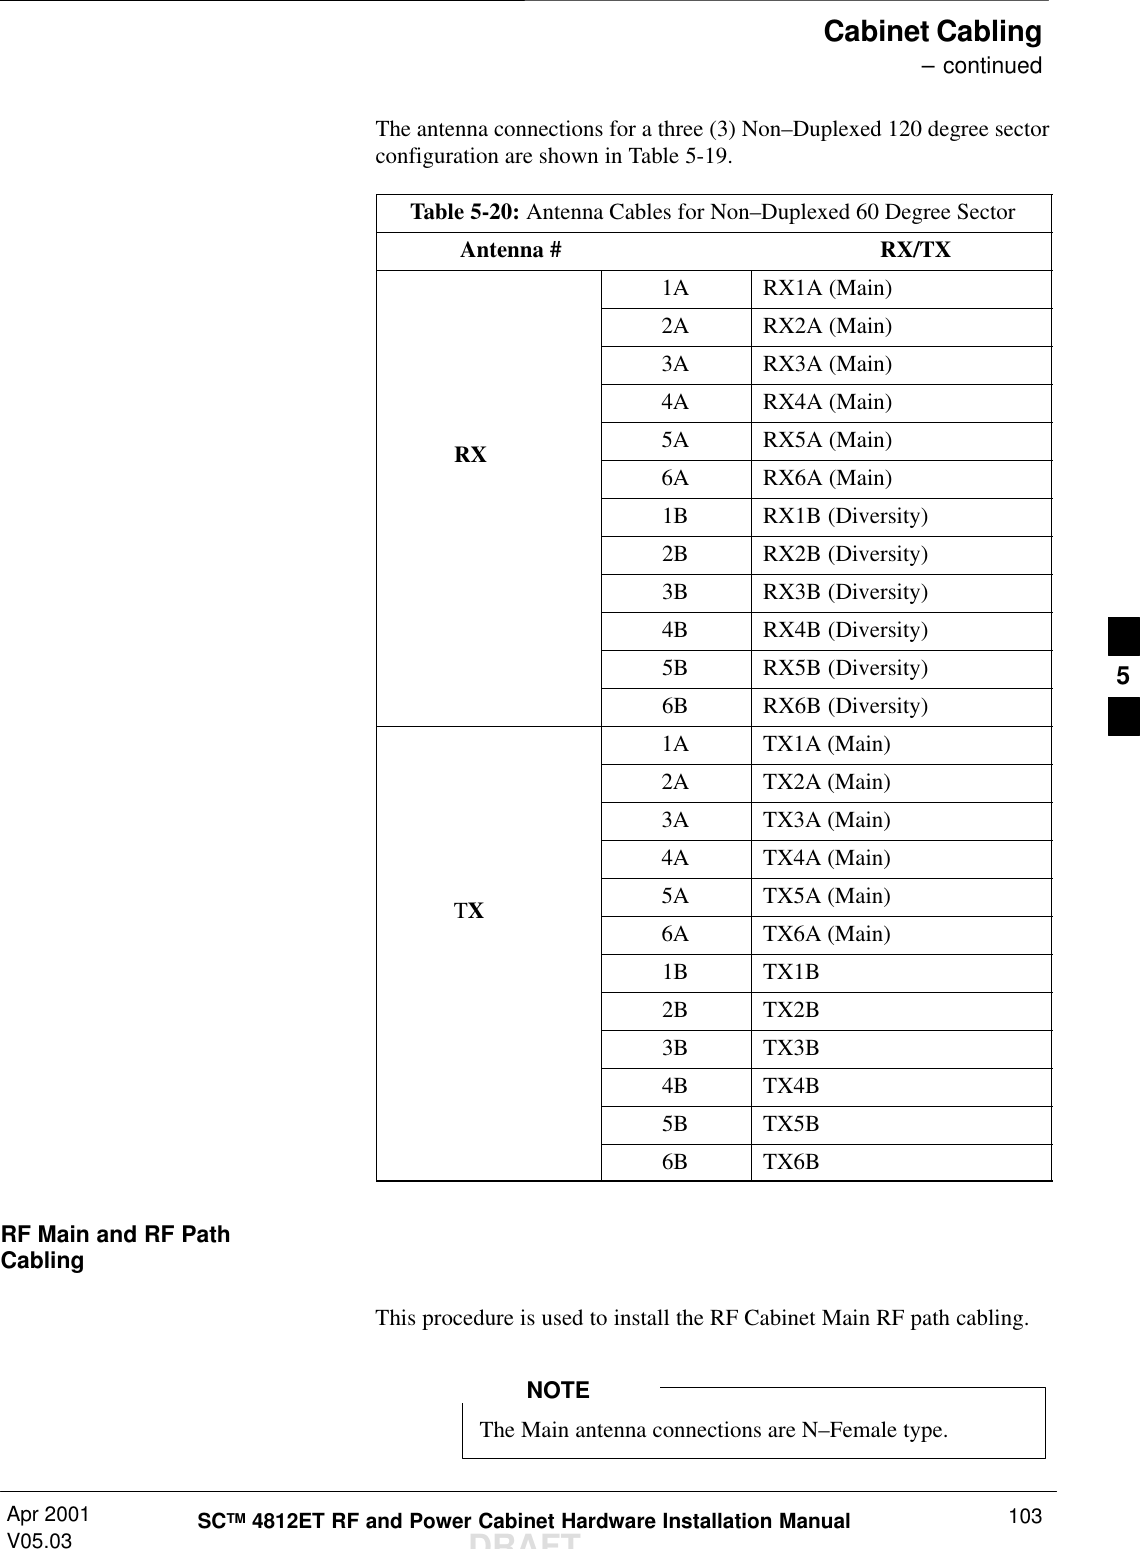 Cabinet Cabling – continuedApr 2001V05.03 103SCTM 4812ET RF and Power Cabinet Hardware Installation ManualDRAFTThe antenna connections for a three (3) Non–Duplexed 120 degree sectorconfiguration are shown in Table 5-19.Table 5-20: Antenna Cables for Non–Duplexed 60 Degree Sector            Antenna #                                                     RX/TX1A RX1A (Main)2A RX2A (Main)3A RX3A (Main) 4A RX4A (Main)5A RX5A (Main)           RX 6A RX6A (Main)1B RX1B (Diversity)2B RX2B (Diversity)3B RX3B (Diversity)4B RX4B (Diversity)5B RX5B (Diversity)6B RX6B (Diversity)1A TX1A (Main)2A TX2A (Main)3A TX3A (Main) 4A TX4A (Main)5A TX5A (Main)           TX6A TX6A (Main)1B TX1B2B TX2B3B TX3B4B TX4B5B TX5B6B TX6BRF Main and RF PathCablingThis procedure is used to install the RF Cabinet Main RF path cabling.The Main antenna connections are N–Female type.NOTE5